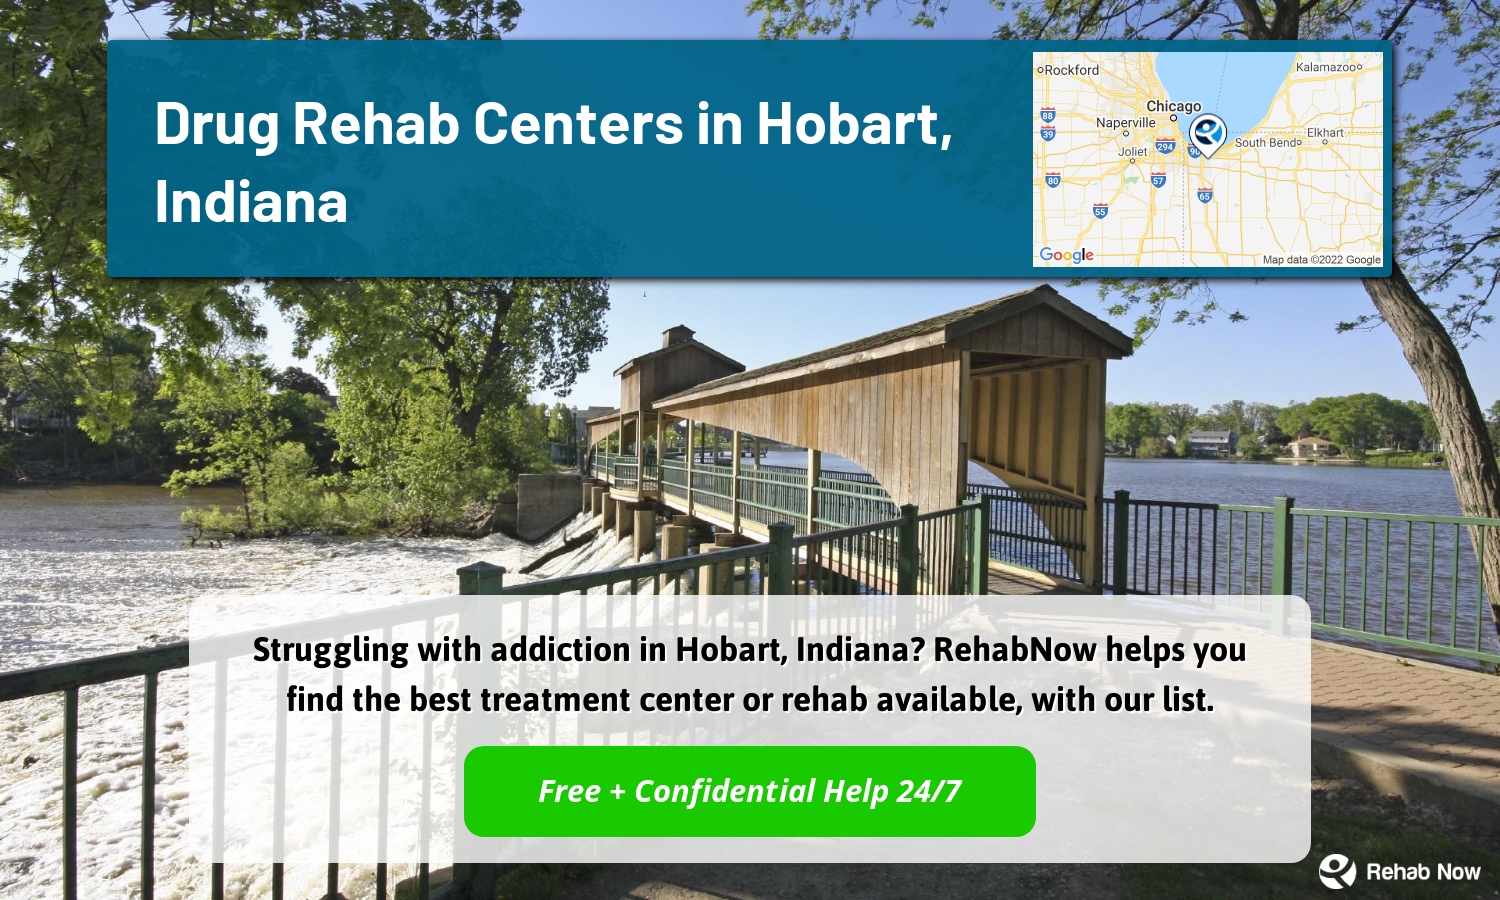 Struggling with addiction in Hobart, Indiana? RehabNow helps you find the best treatment center or rehab available, with our list.